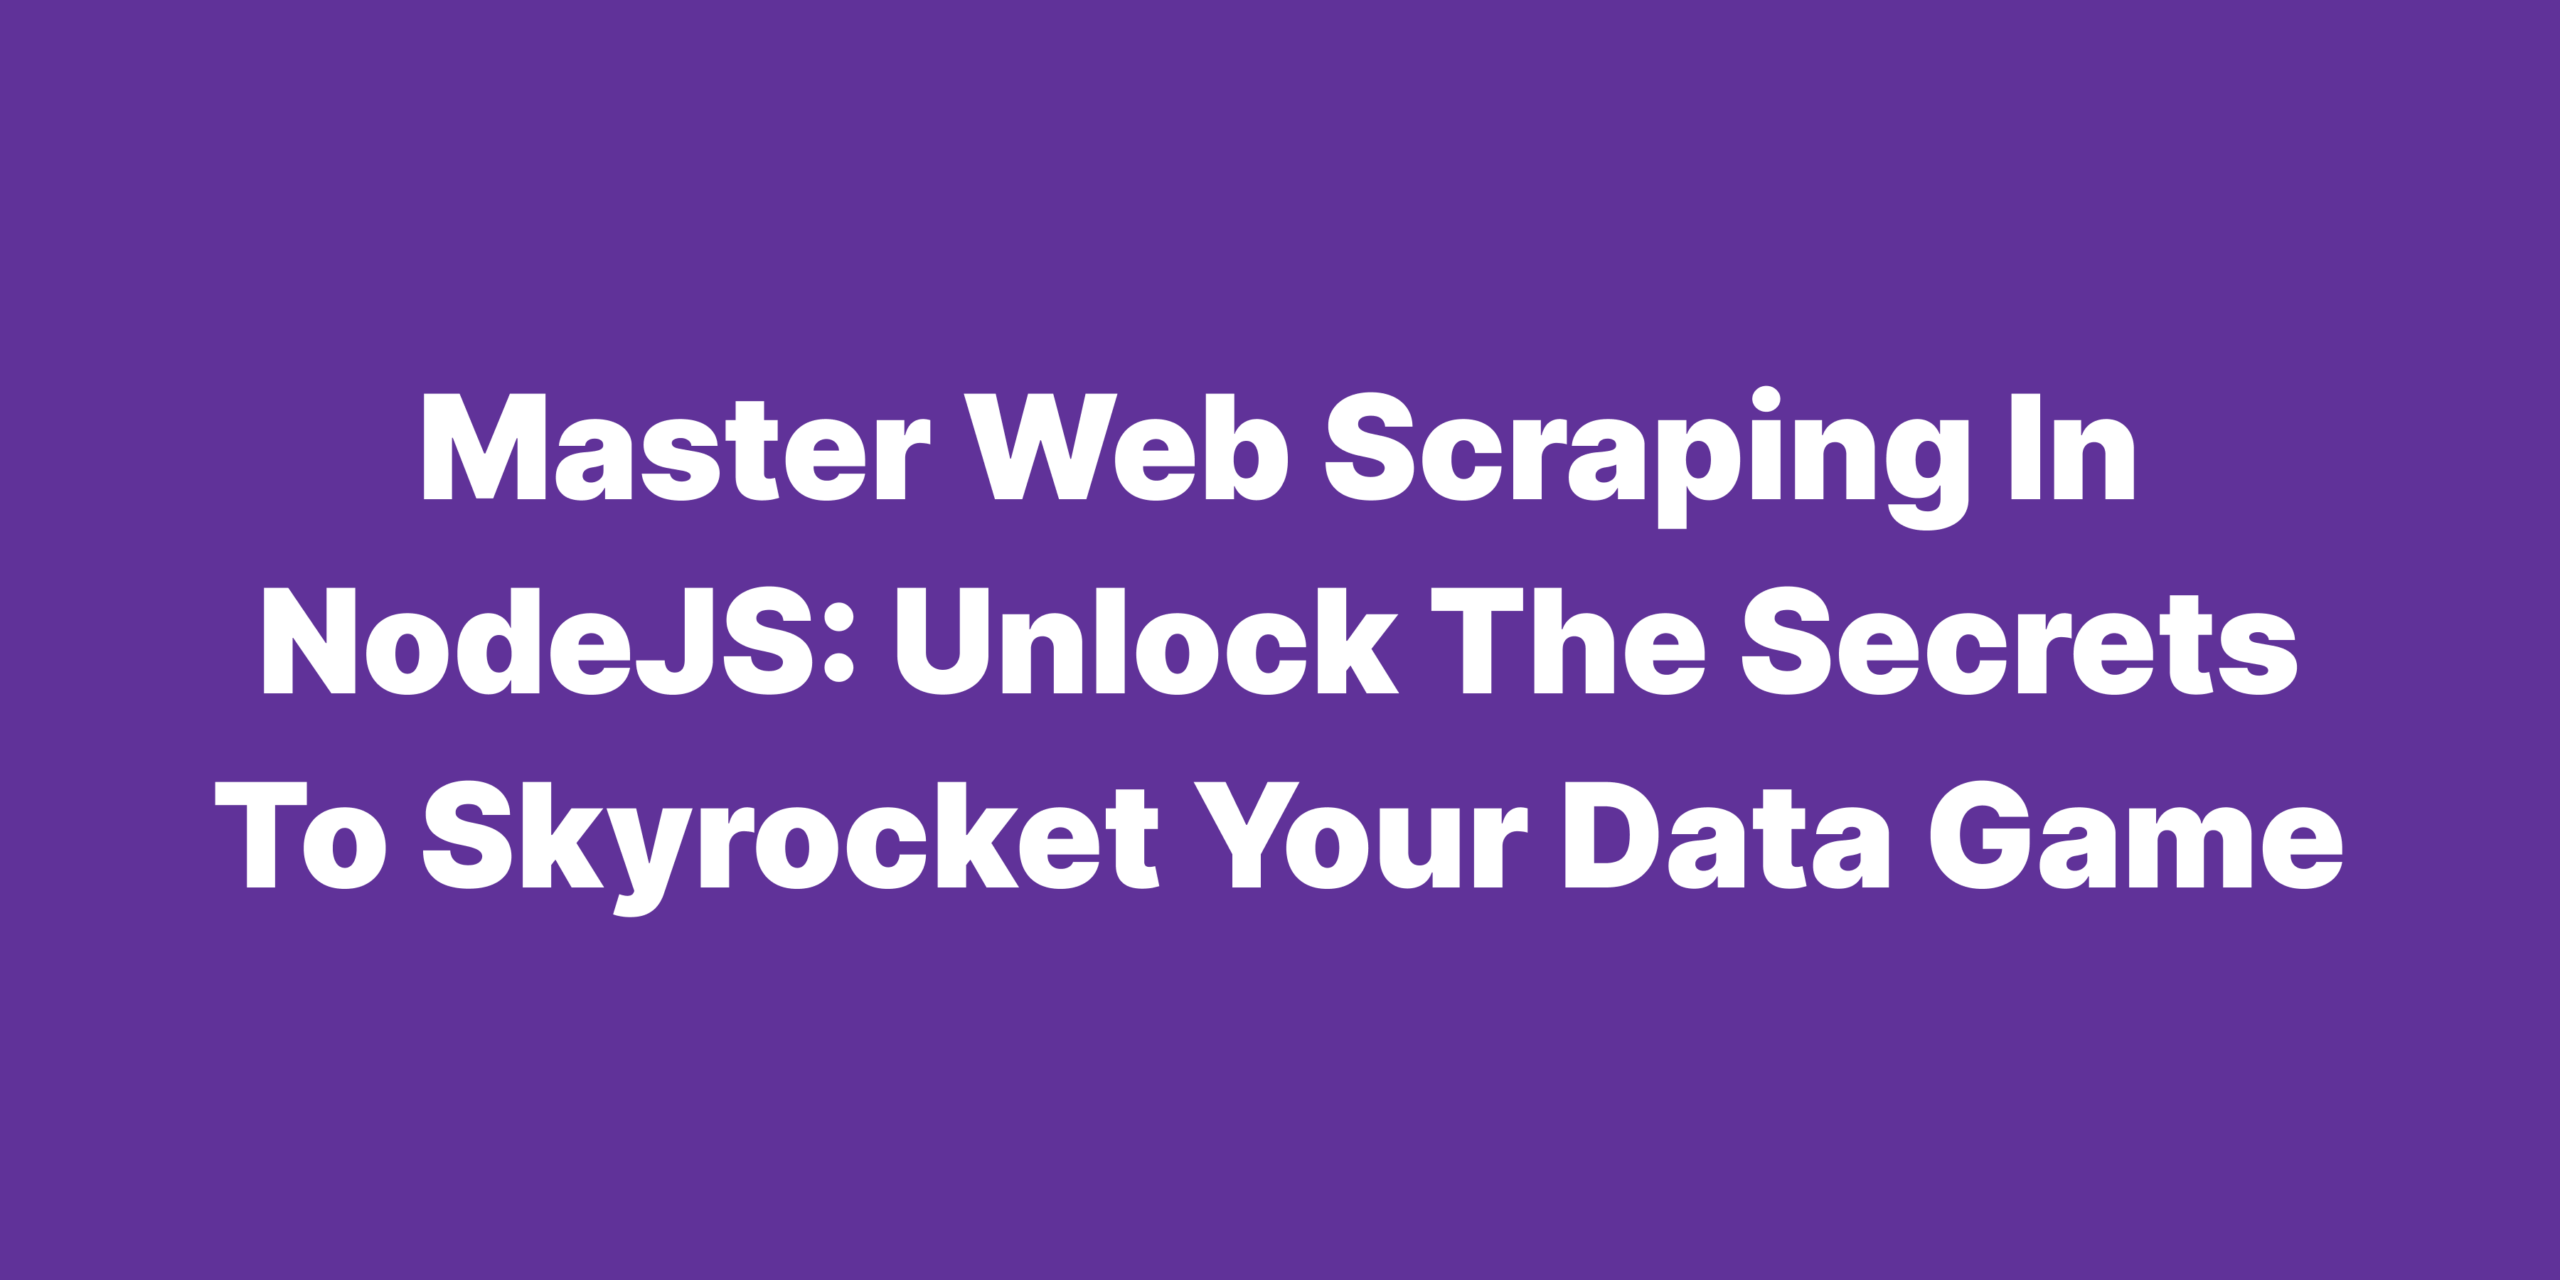 Master Web Scraping in NodeJS Unlock the Secrets to Skyrocket Your Data Game